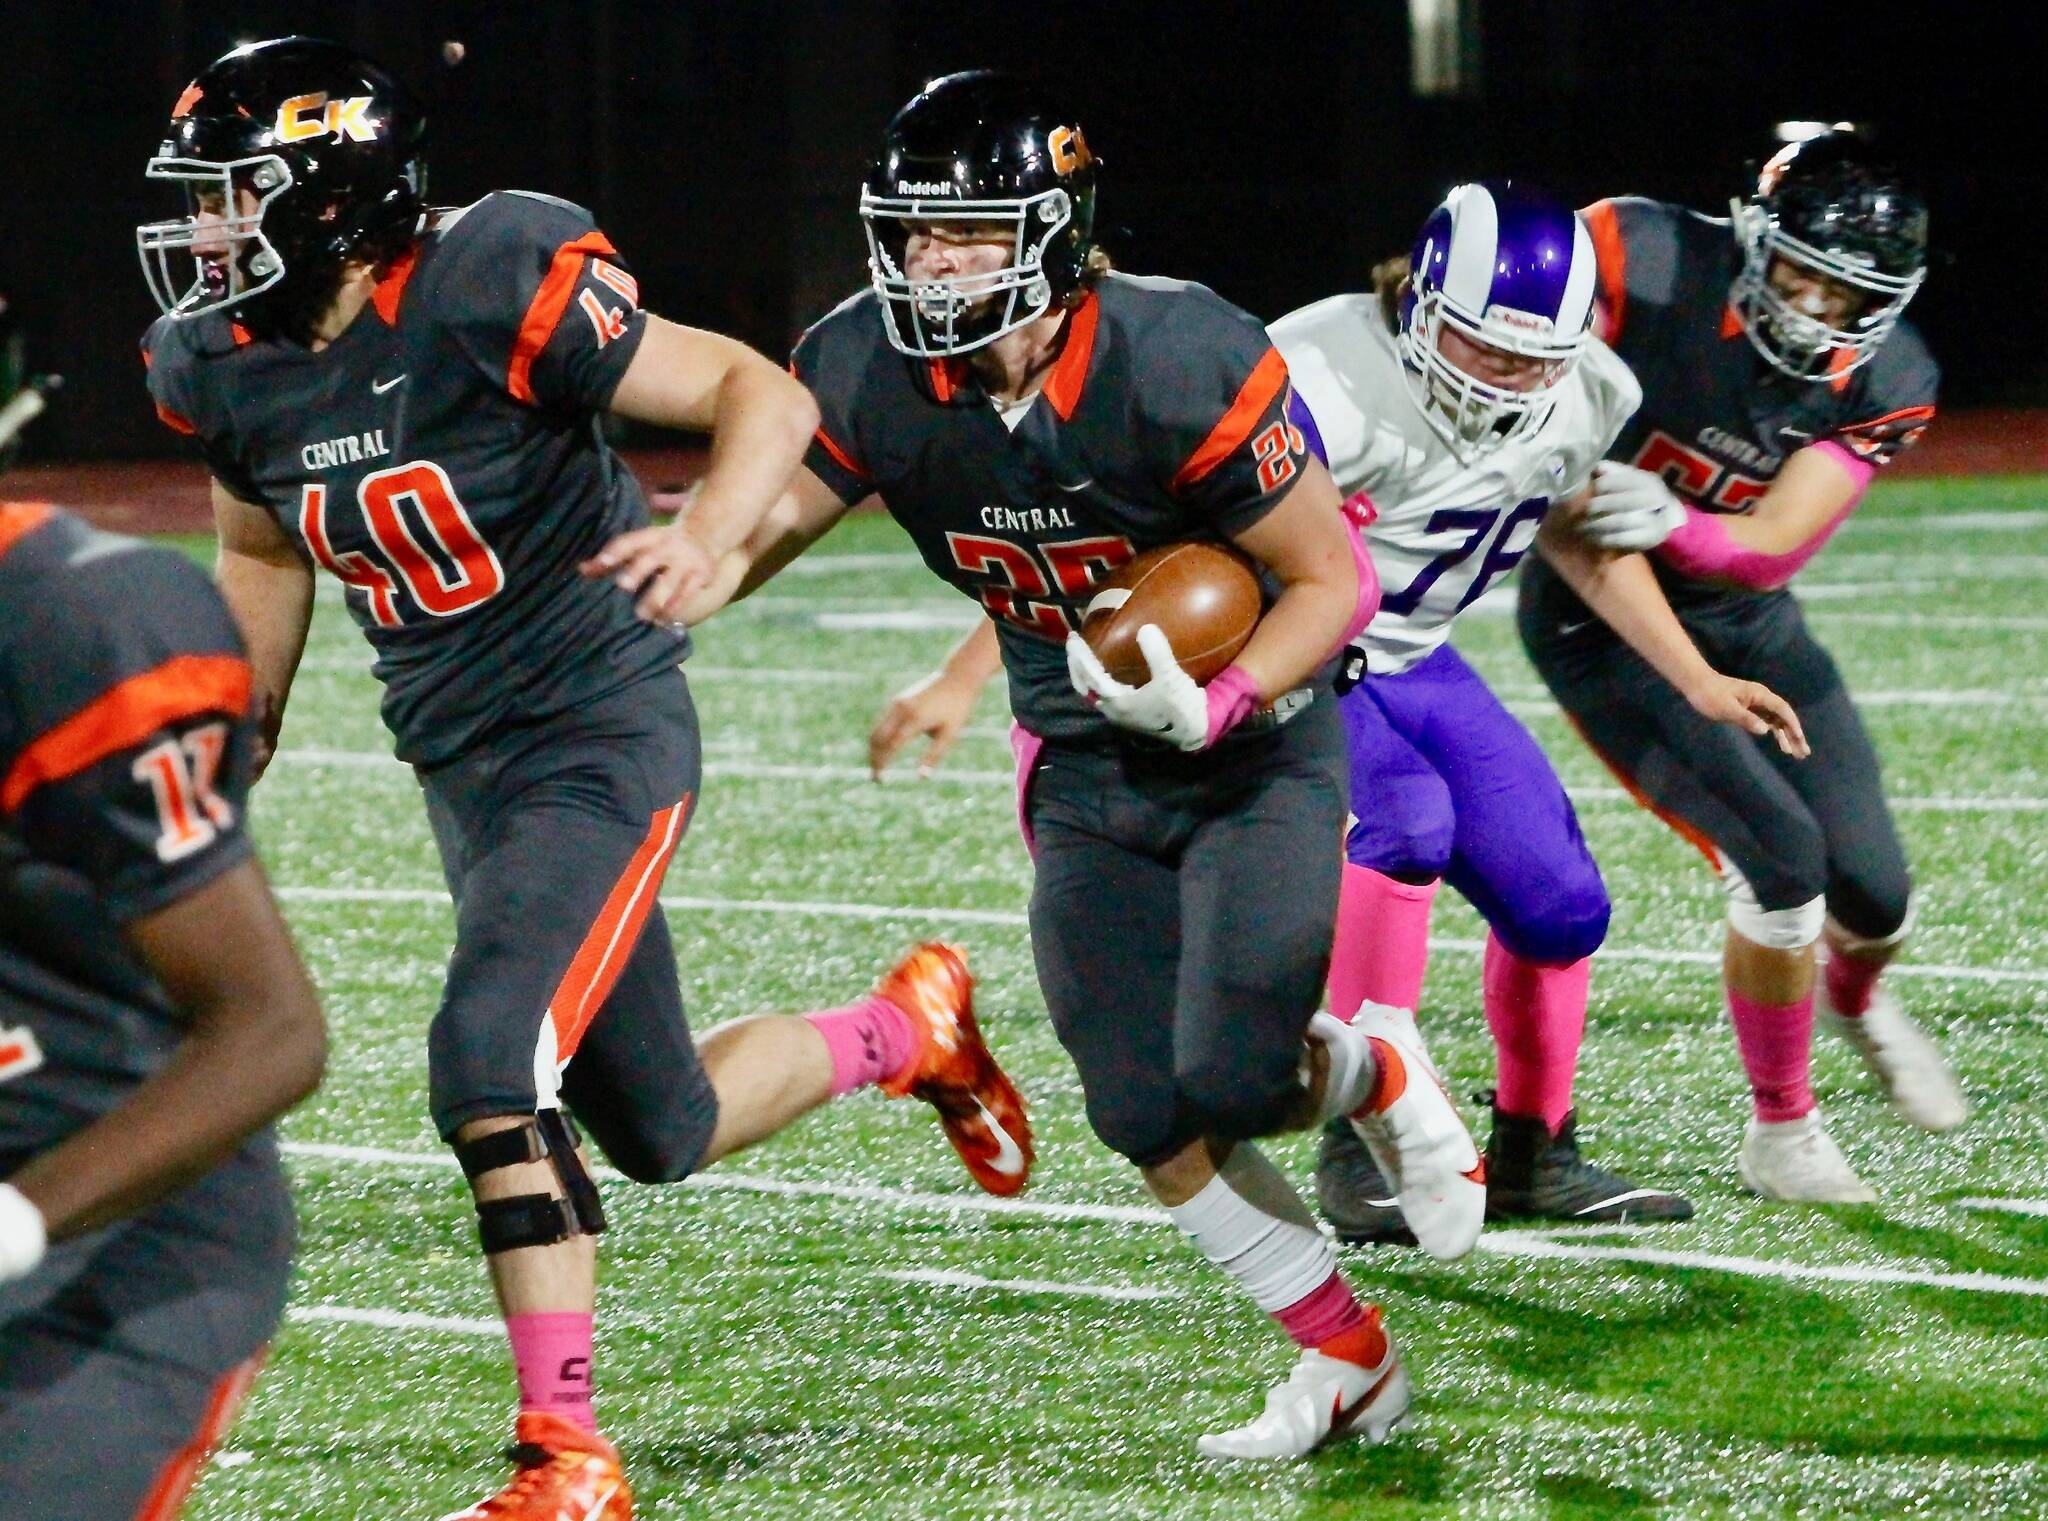 Central Kitsap running back Kouper Hall went over 1,000 rushing yards for the season against North Thurston on Friday night. He had 304 yards and four touchdowns in the 61-7 win. (Mark Krulish/Kitsap News Group)